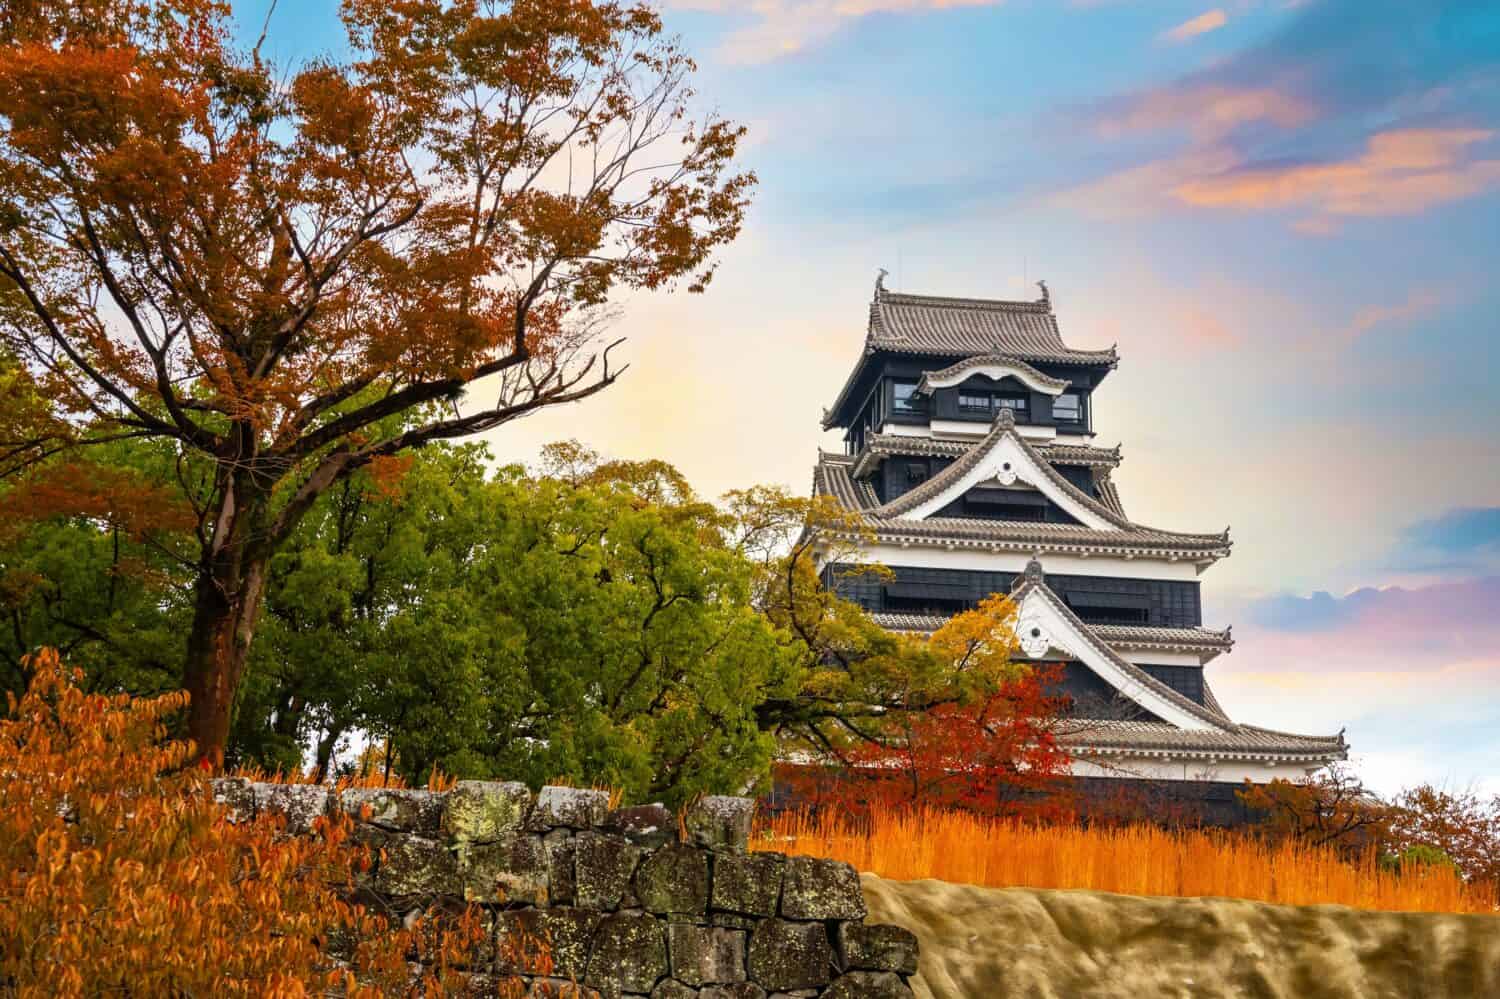 Kumamoto Castle's history dates to 1467. In 2006, Kumamoto Castle was listed as one of the 100 Fine Castles of Japan by the Japan Castle Foundation